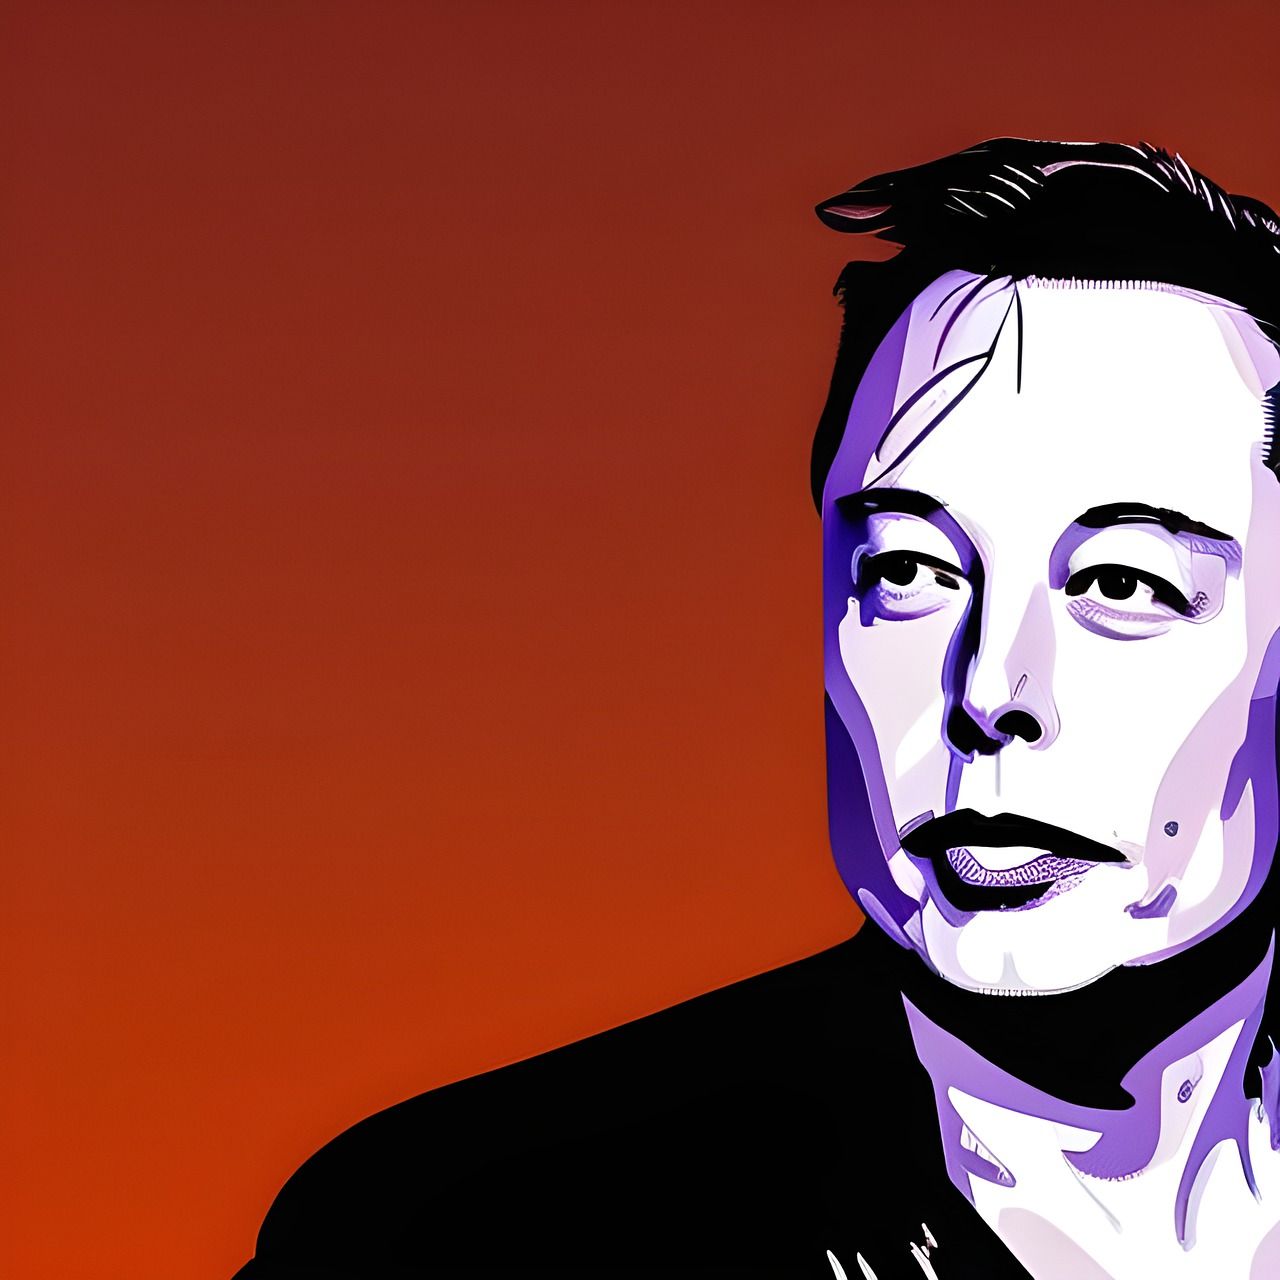 What Is Up With Elon Musk?